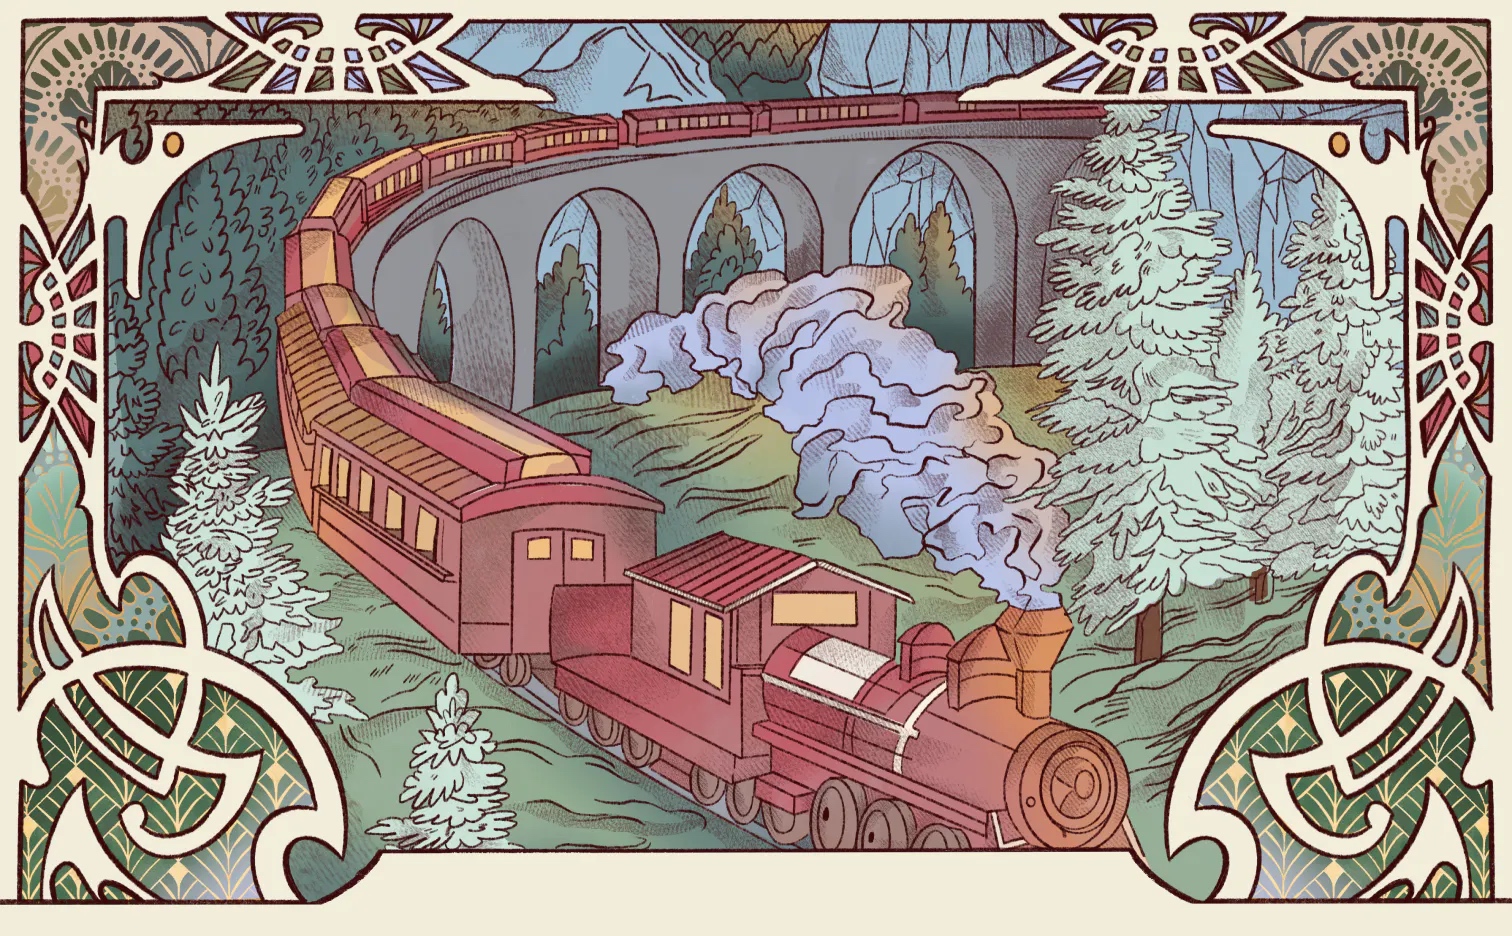 Old-timey drawing of a train going through a forest